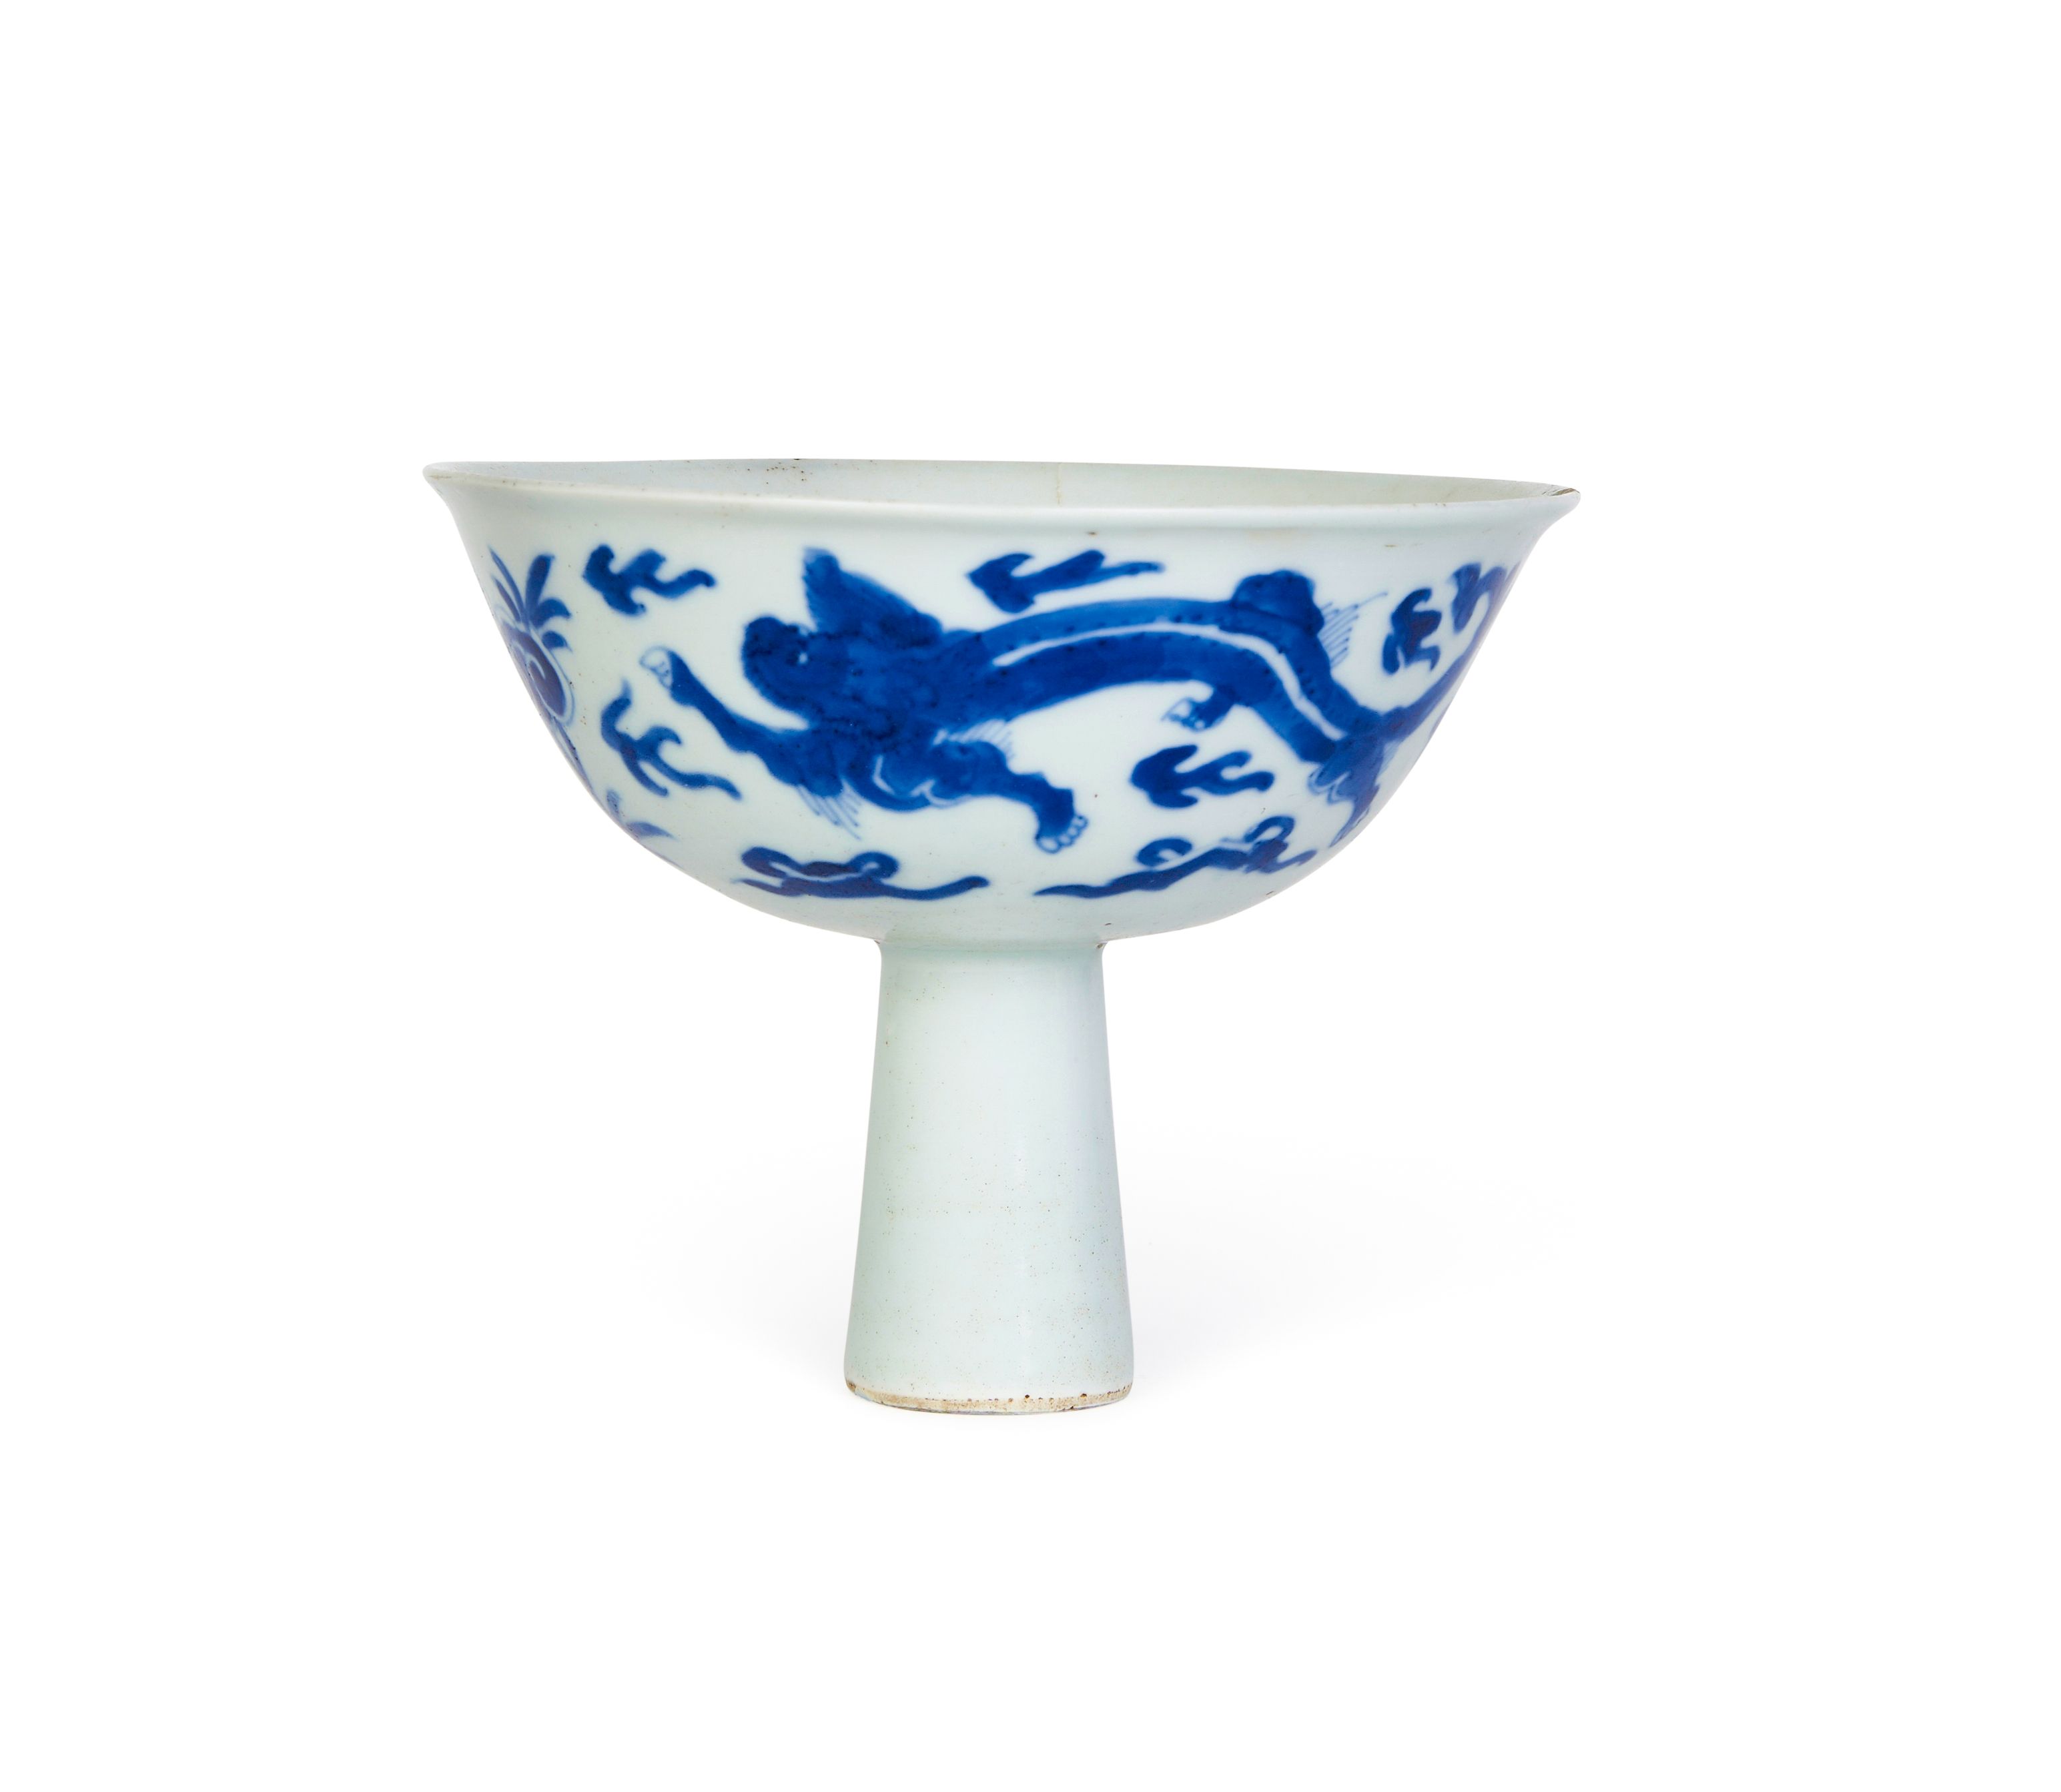 A CHINESE BLUE & WHITE STEM CUP, QING DYNASTY (1644-1911)